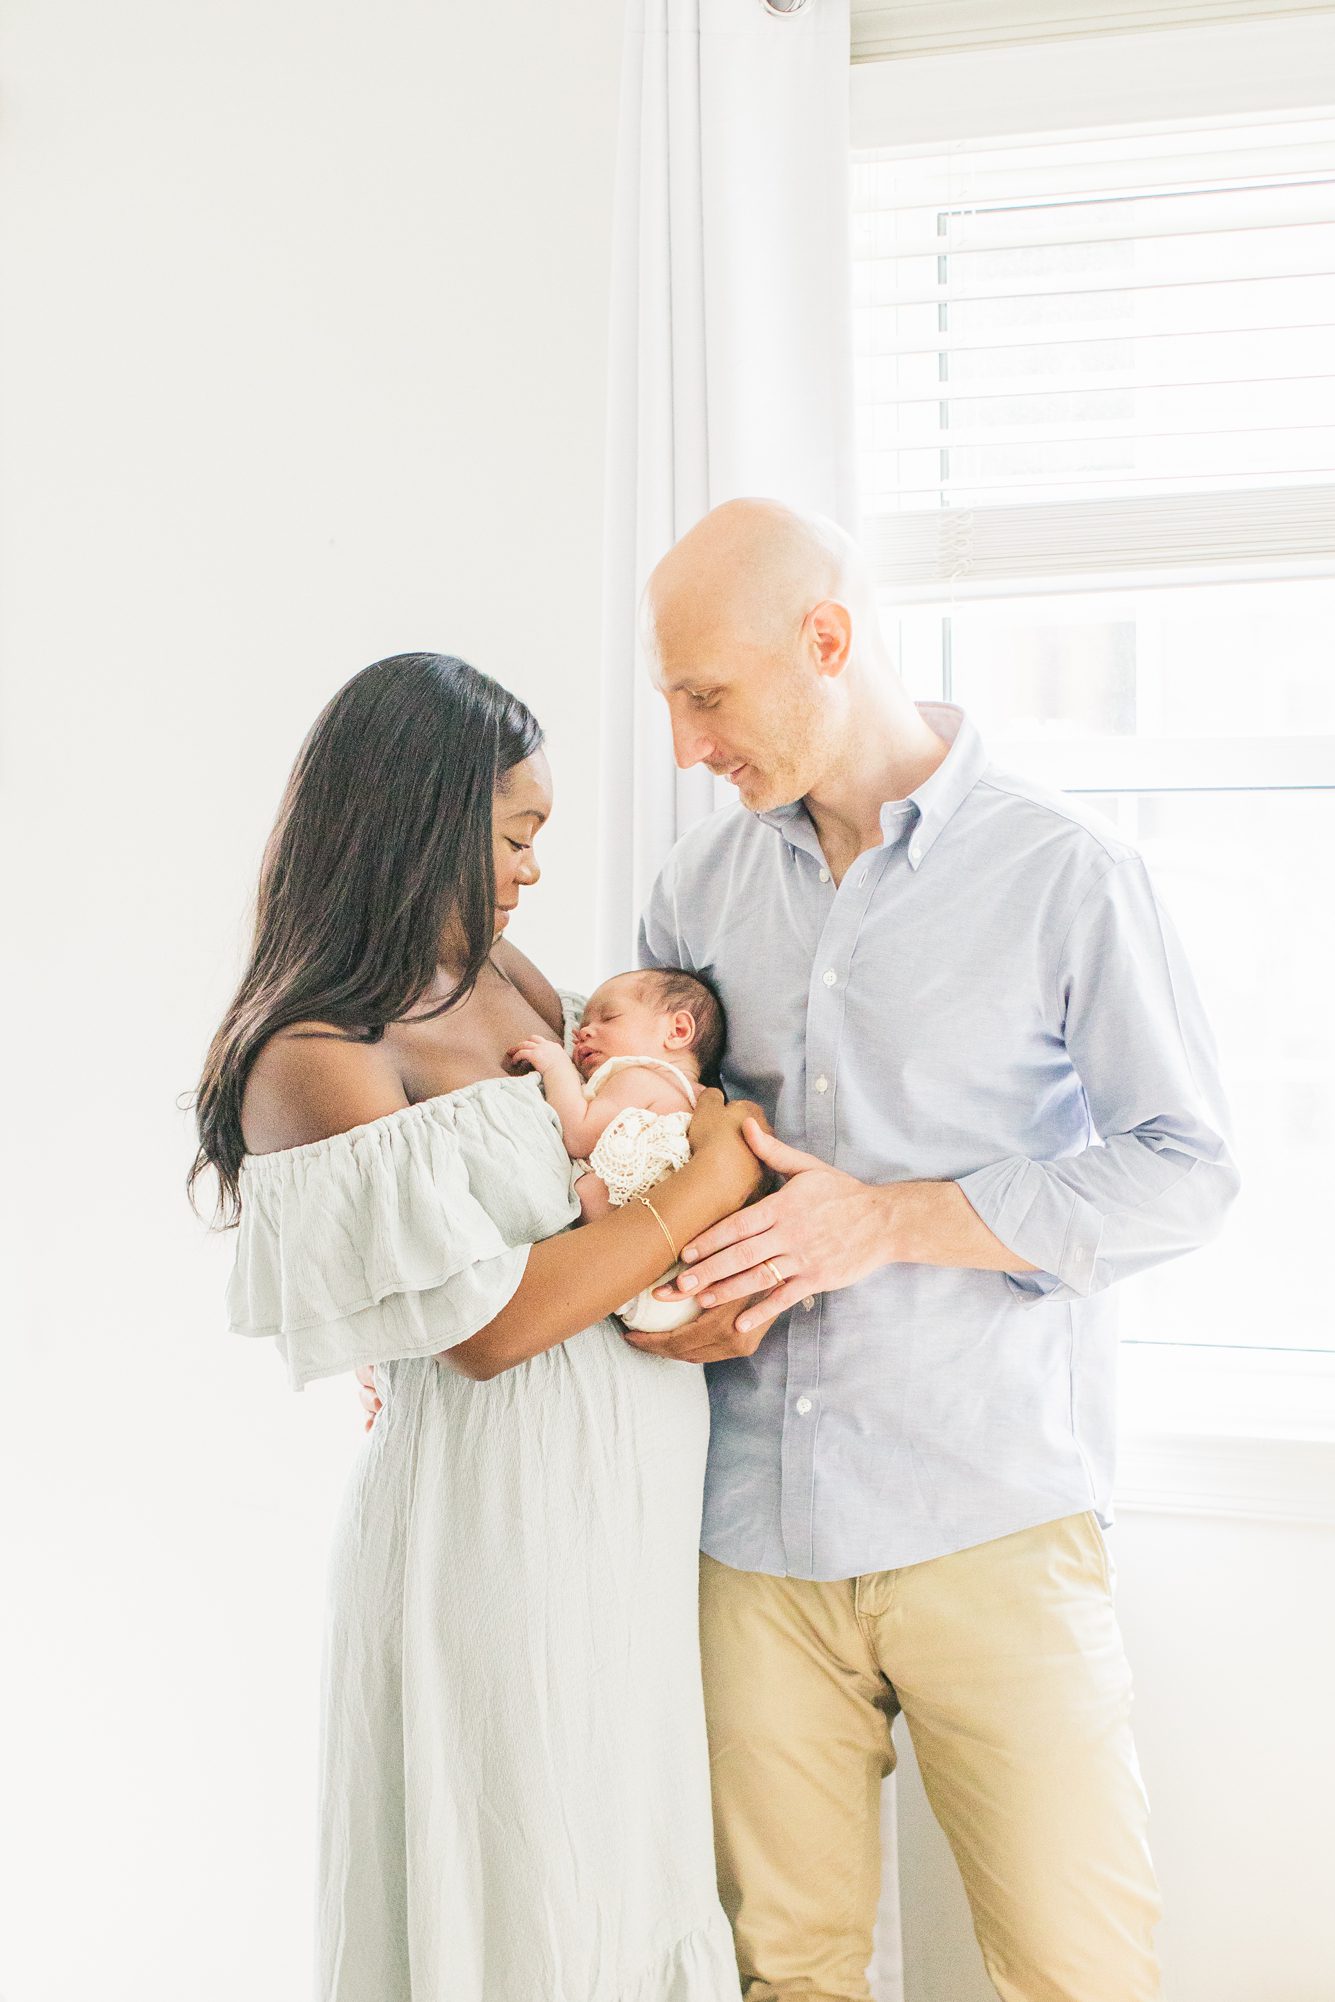 Sweet moment between Mom and Dad with baby during in home lifestyle newborn session in Washington DC. Photo by LRG Portraits.